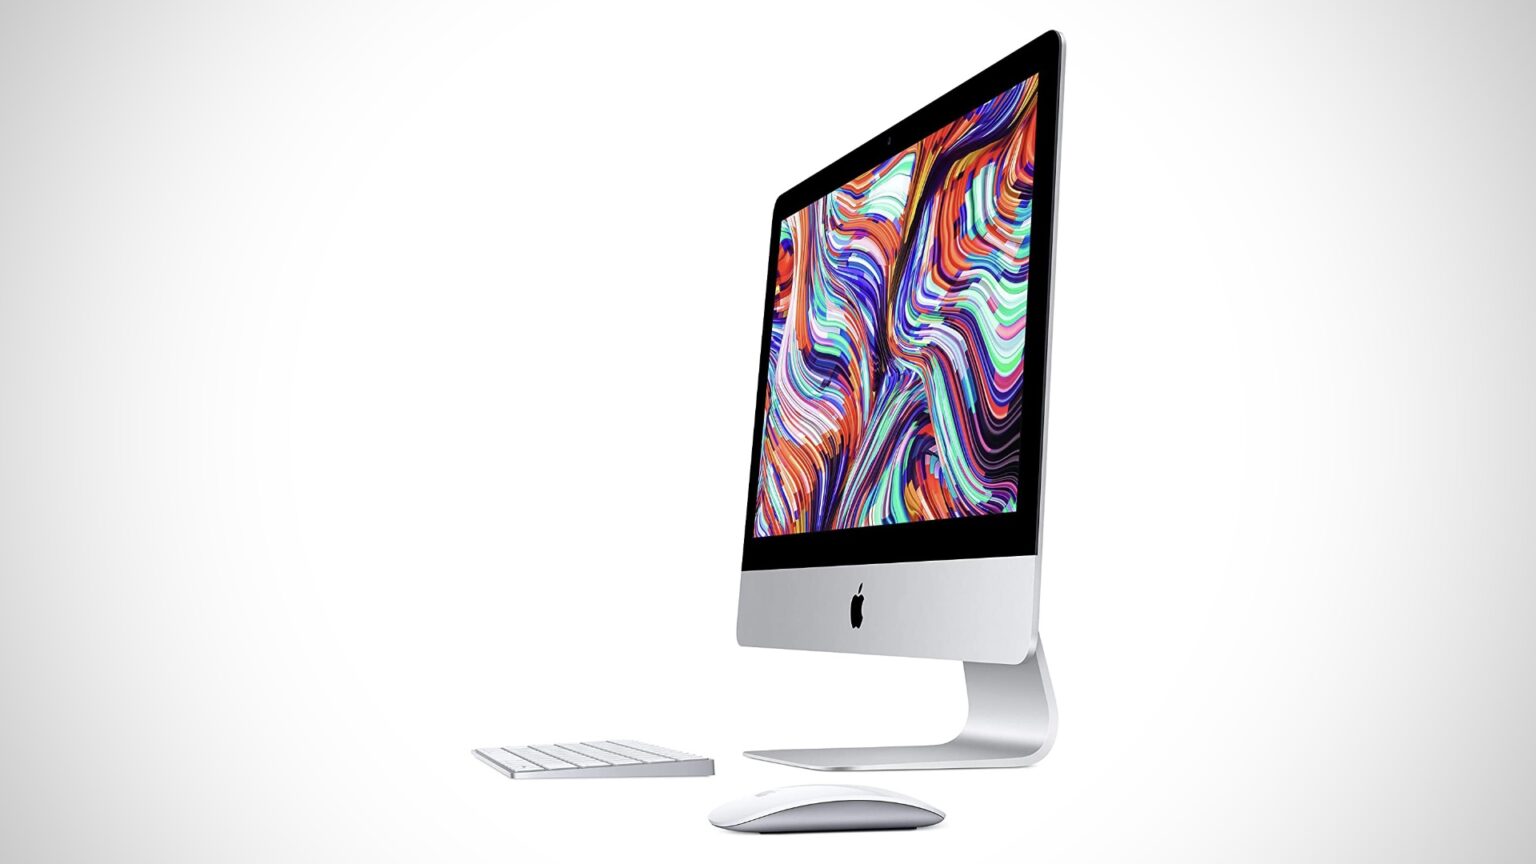 21-inch iMac sees its biggest discount